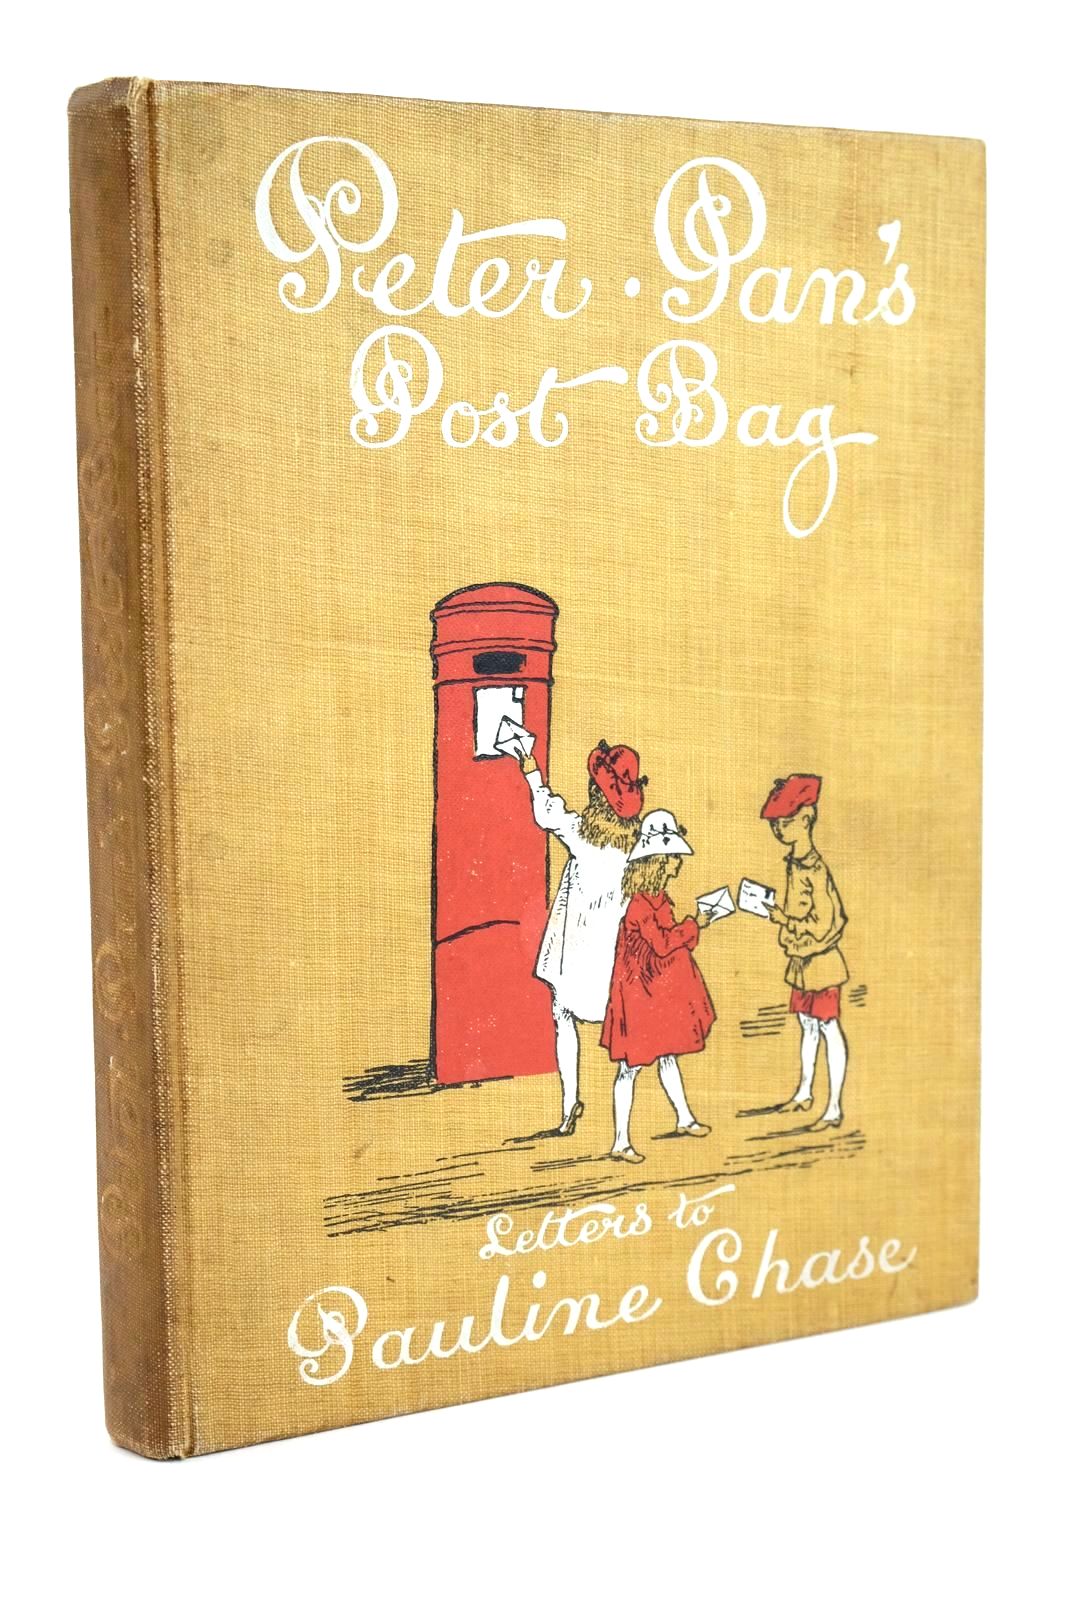 Photo of PETER PAN'S POSTBAG illustrated by Rothenstein, Albert published by William Heinemann (STOCK CODE: 1323259)  for sale by Stella & Rose's Books